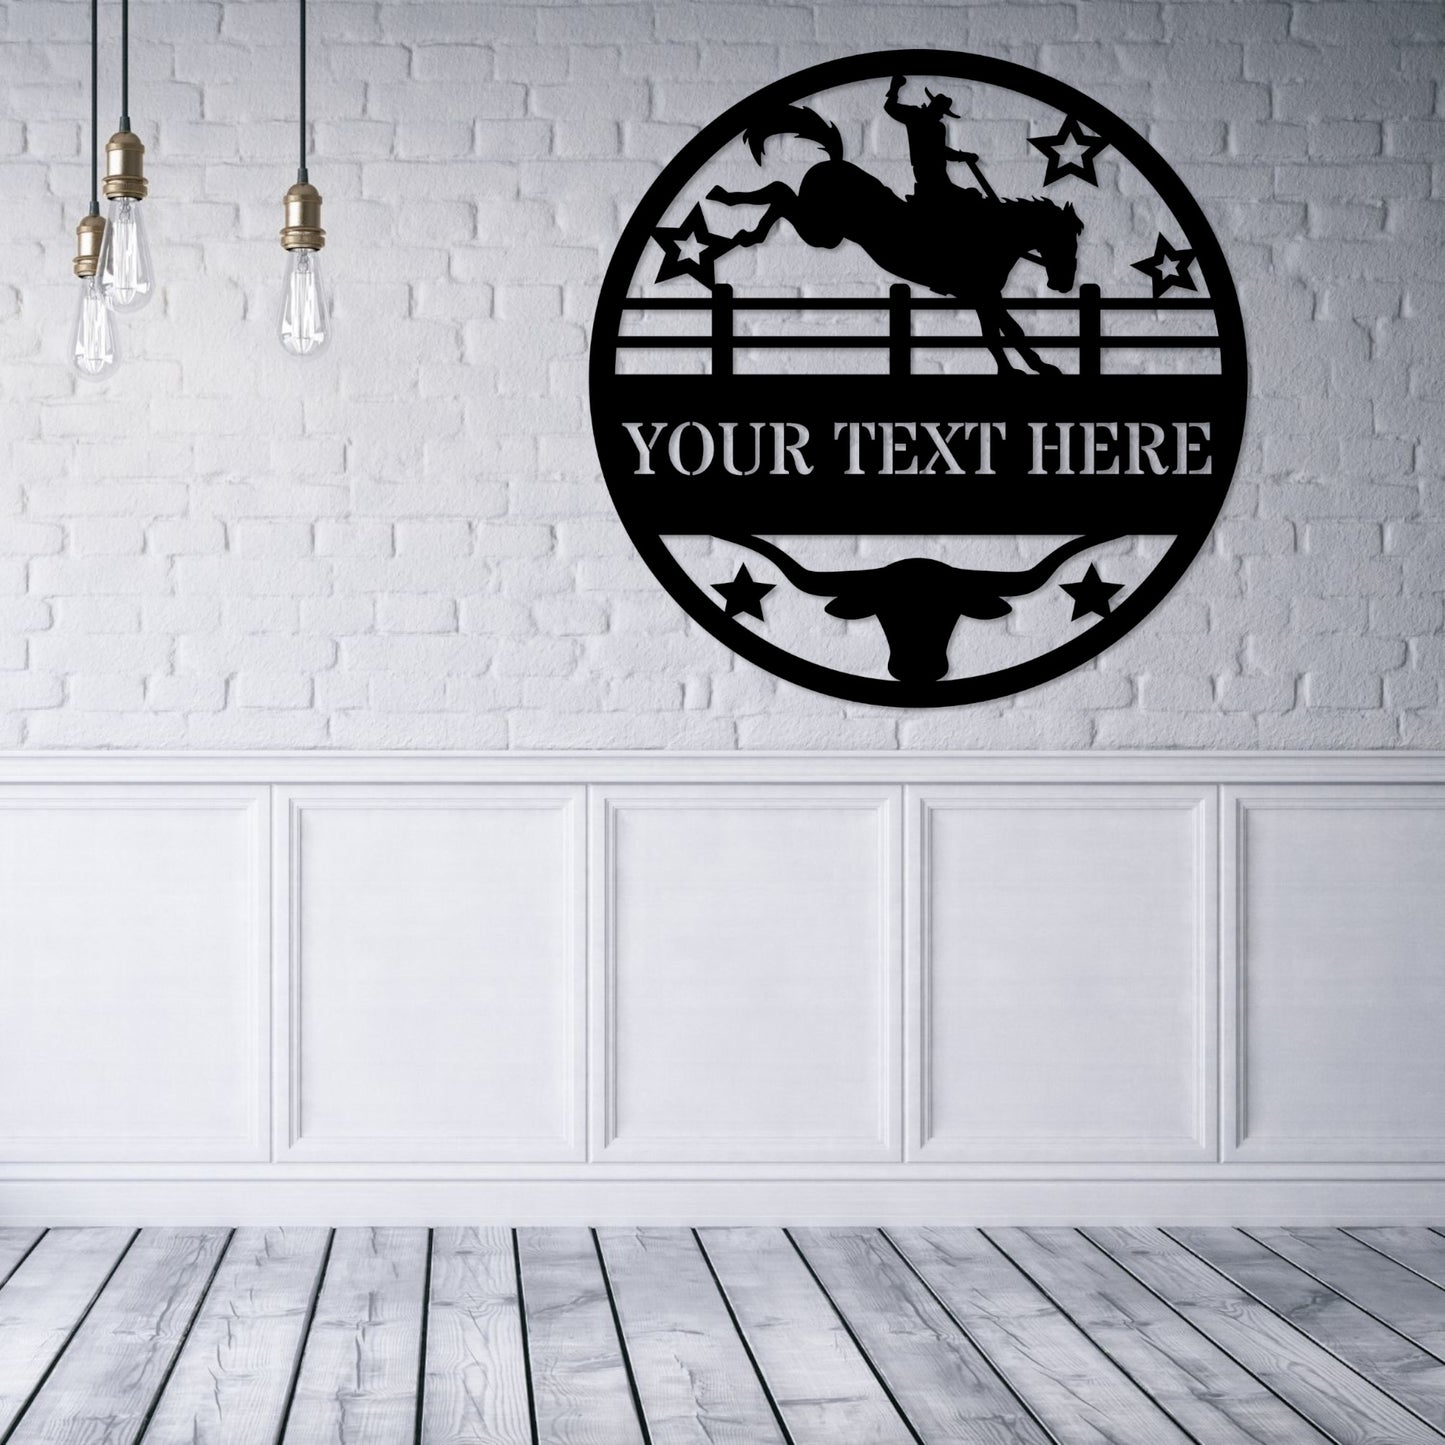 Personalized Horse Rodeo Name Metal Sign Gift. Custom Cowboy Wall Decor Gift. Horse Ranch Wall Haning. Horse Lover Present. Animal Lover Art